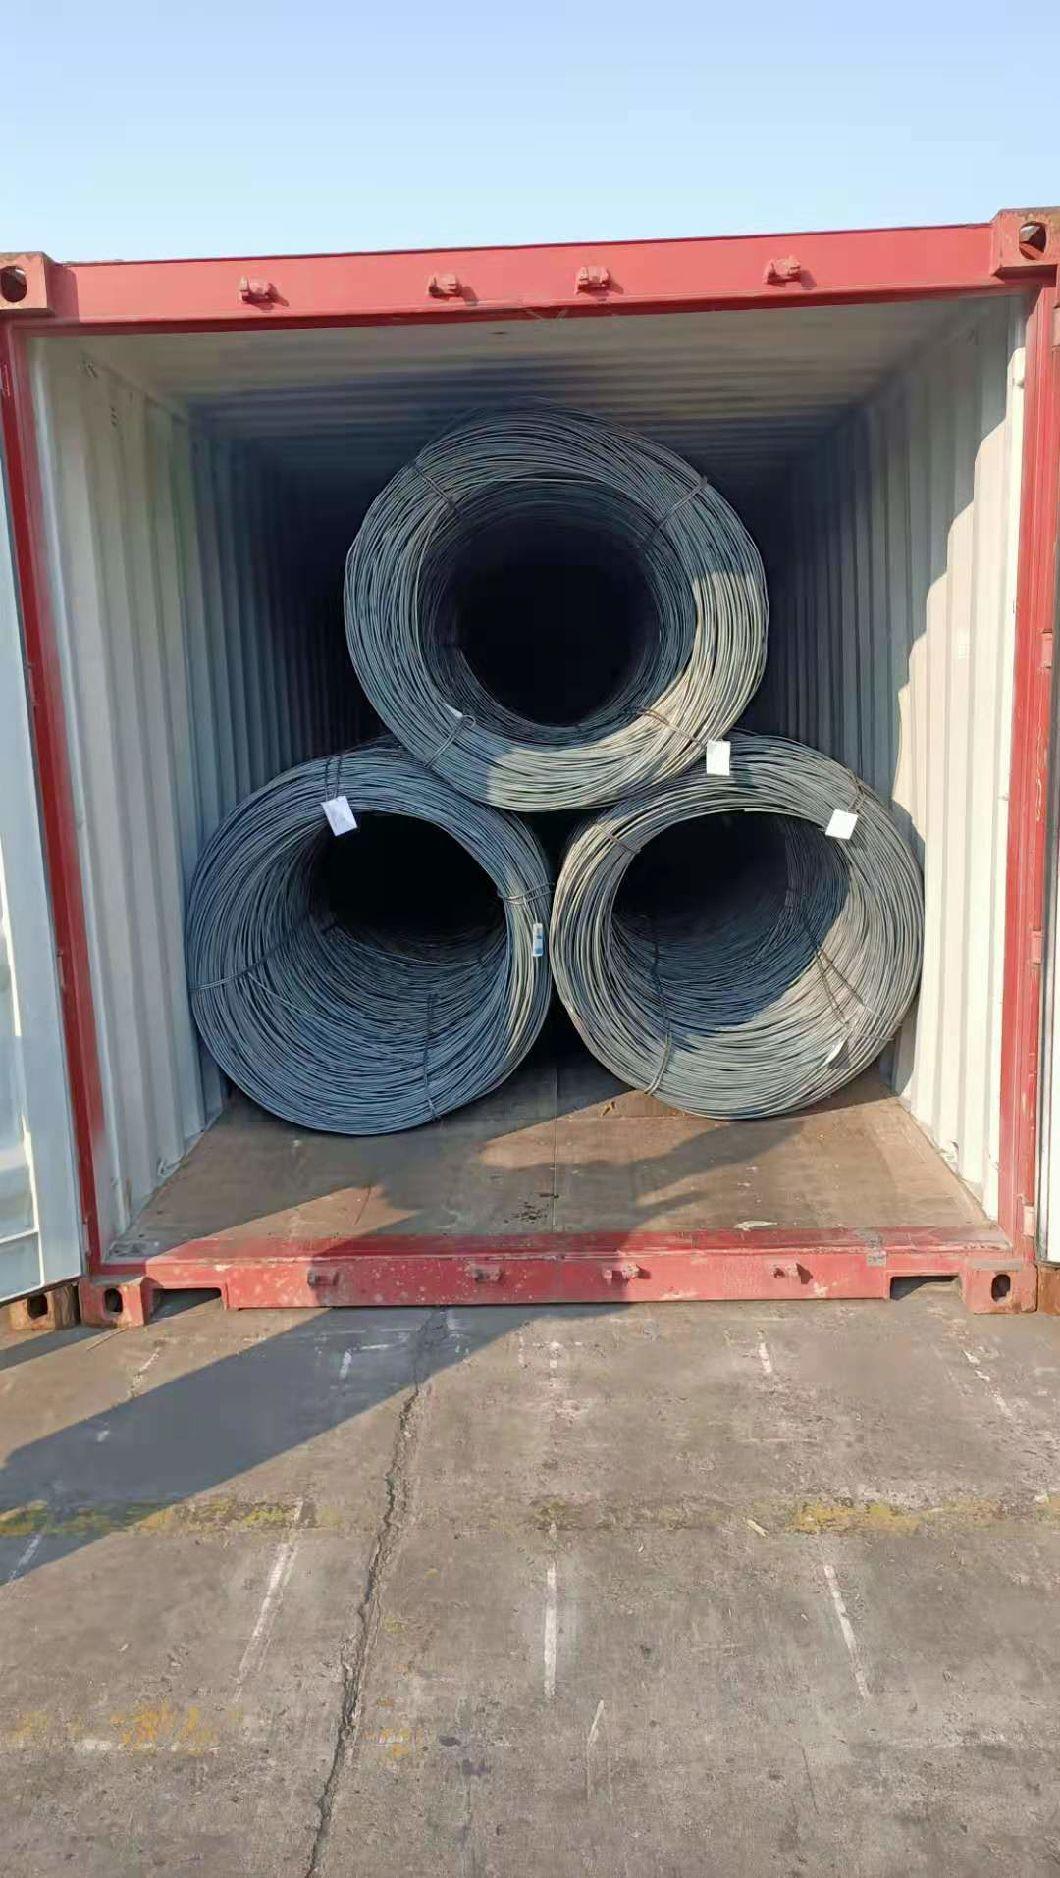 Hot Sale Ready Stock High Tensile Low Carbon SAE1006 SAE1008 Wire Rod for Construction